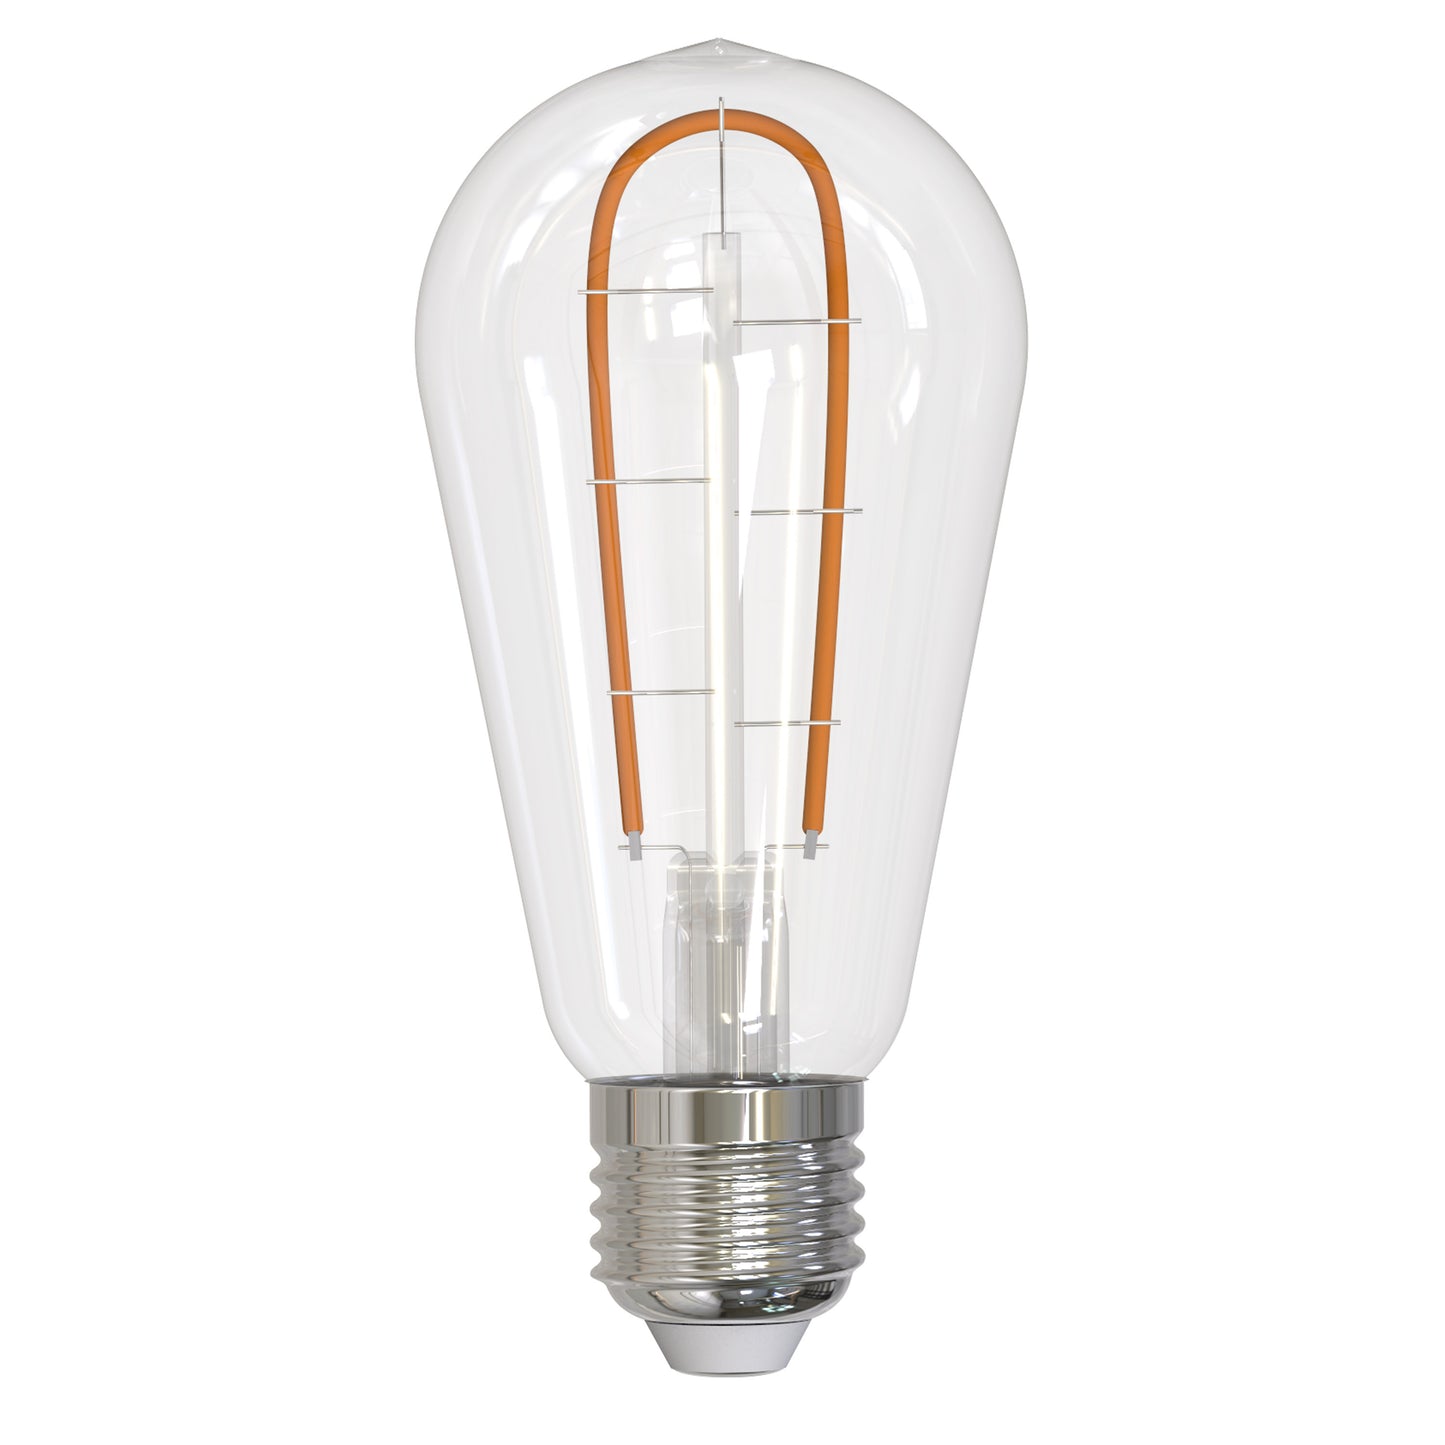 Bulbrite LED Curved Filament 3 Watt Dimmable ST18 Light Bulbs with Clear Finish and Medium (E26) Base - 2100K (Warm Amber Light), 230 Lumens